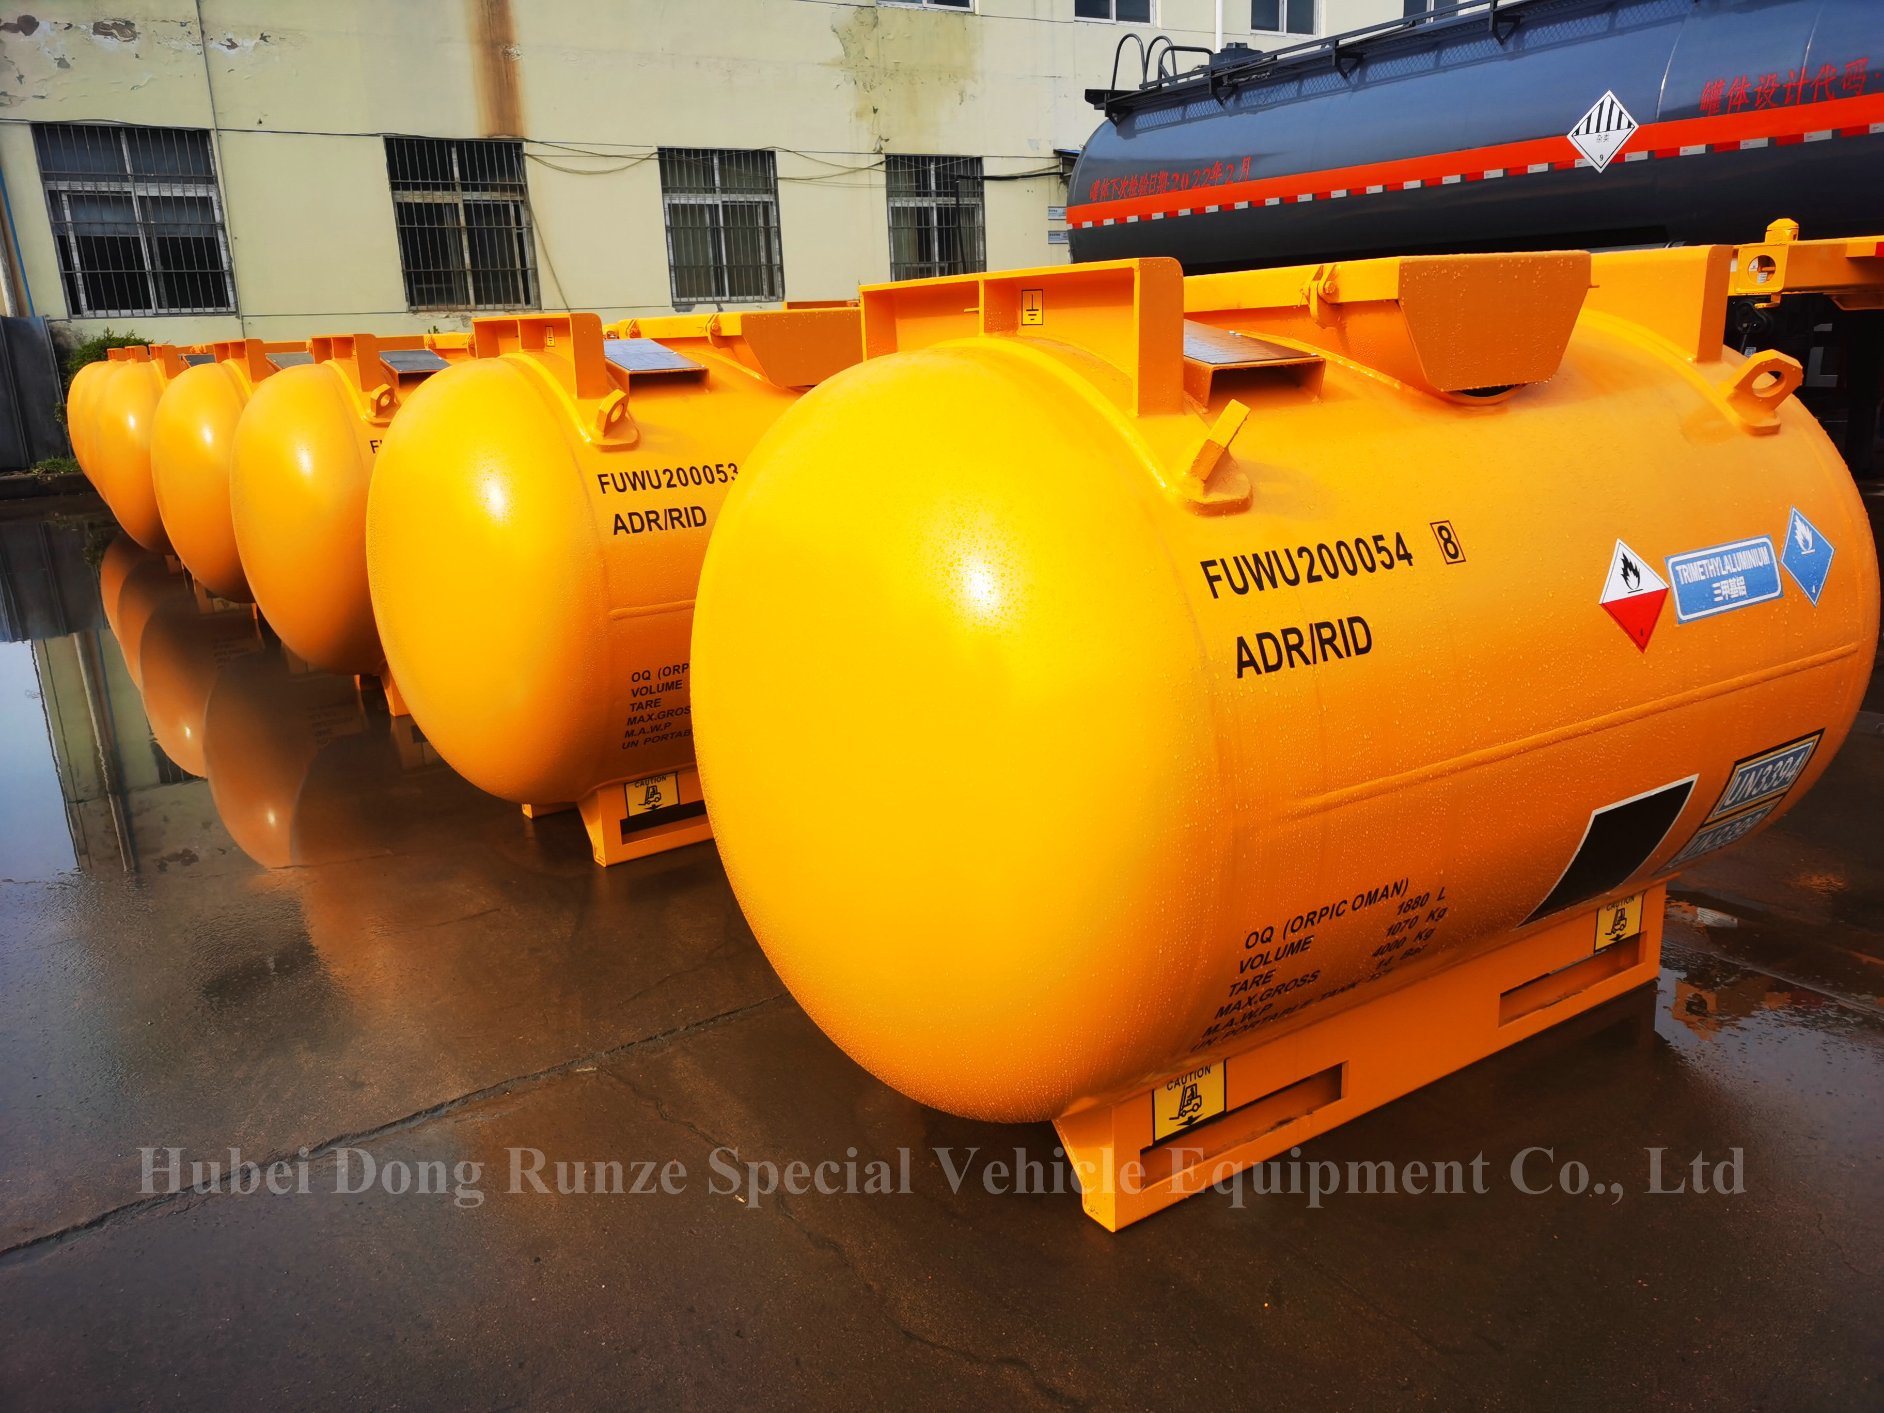 Metal Alkyls Portable Tank Loading 1.4mt Tmga, Tega, Tmin, Tmal, Teal with ASME BV CCS for Offshore Storage and Transport (T21 Cylinder)